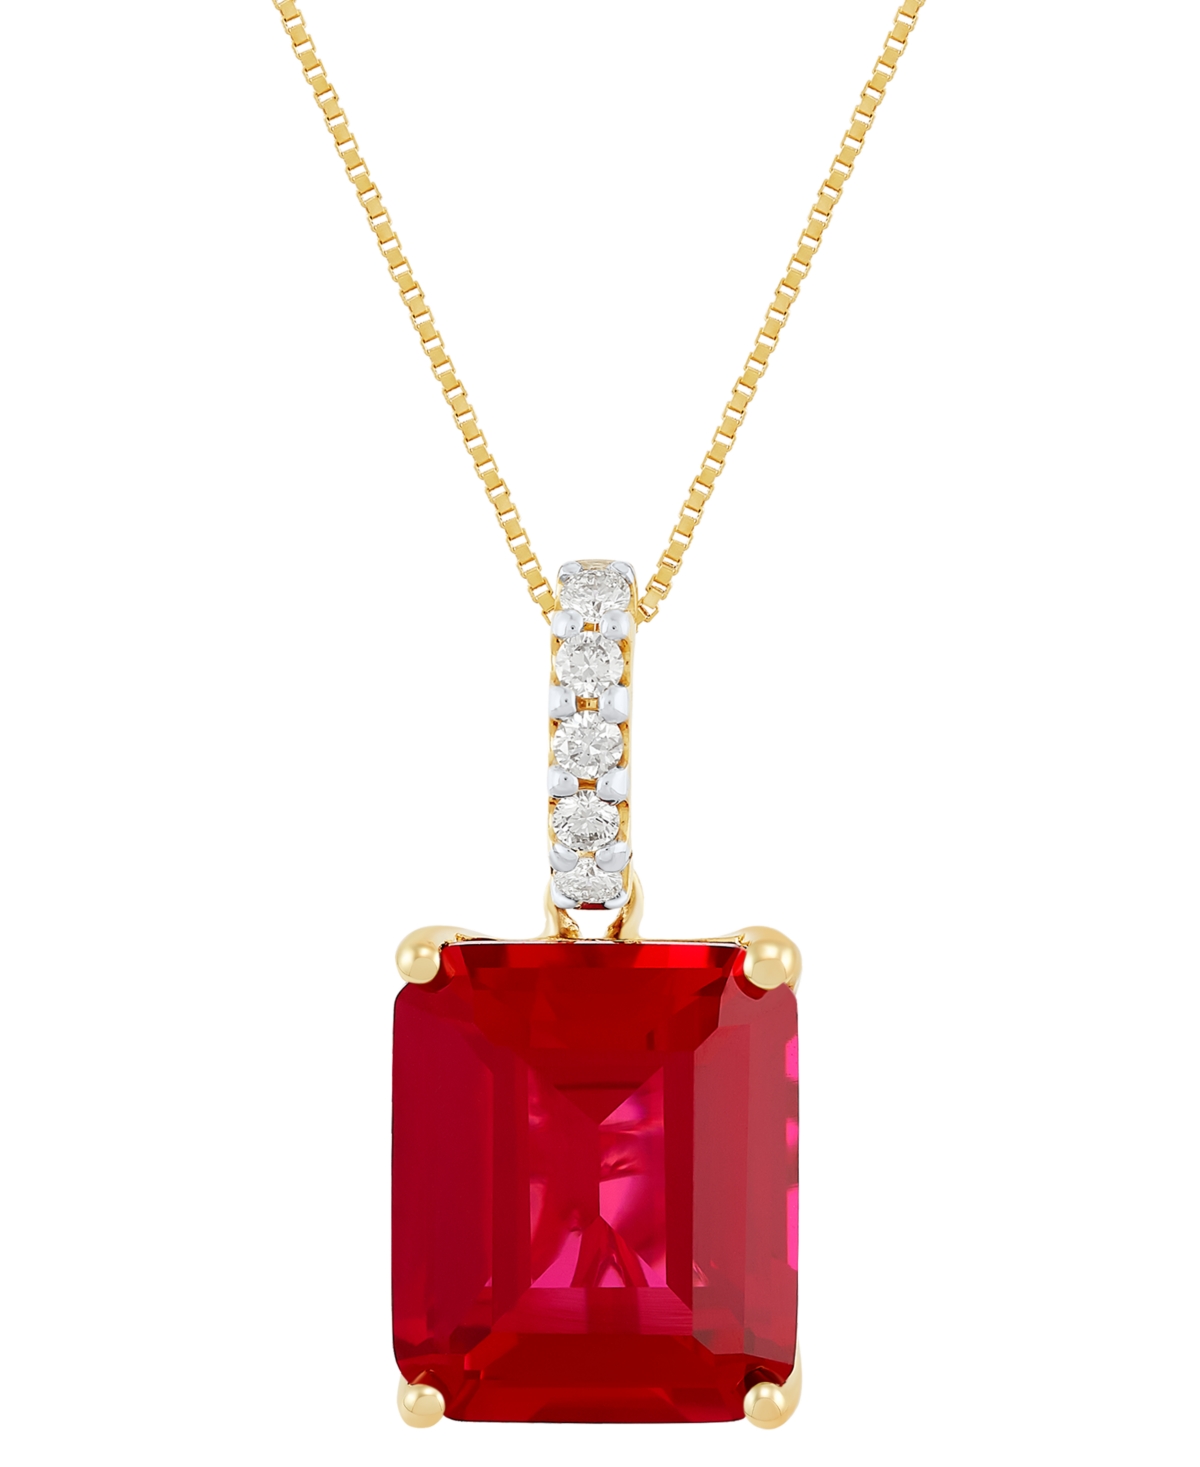 Lab Grown Sapphire (8-1/10 ct. t.w.) & Lab Grown Diamond 18" Pendant Necklace in 14k White Gold (Also in Ruby & Emerald) - Ruby